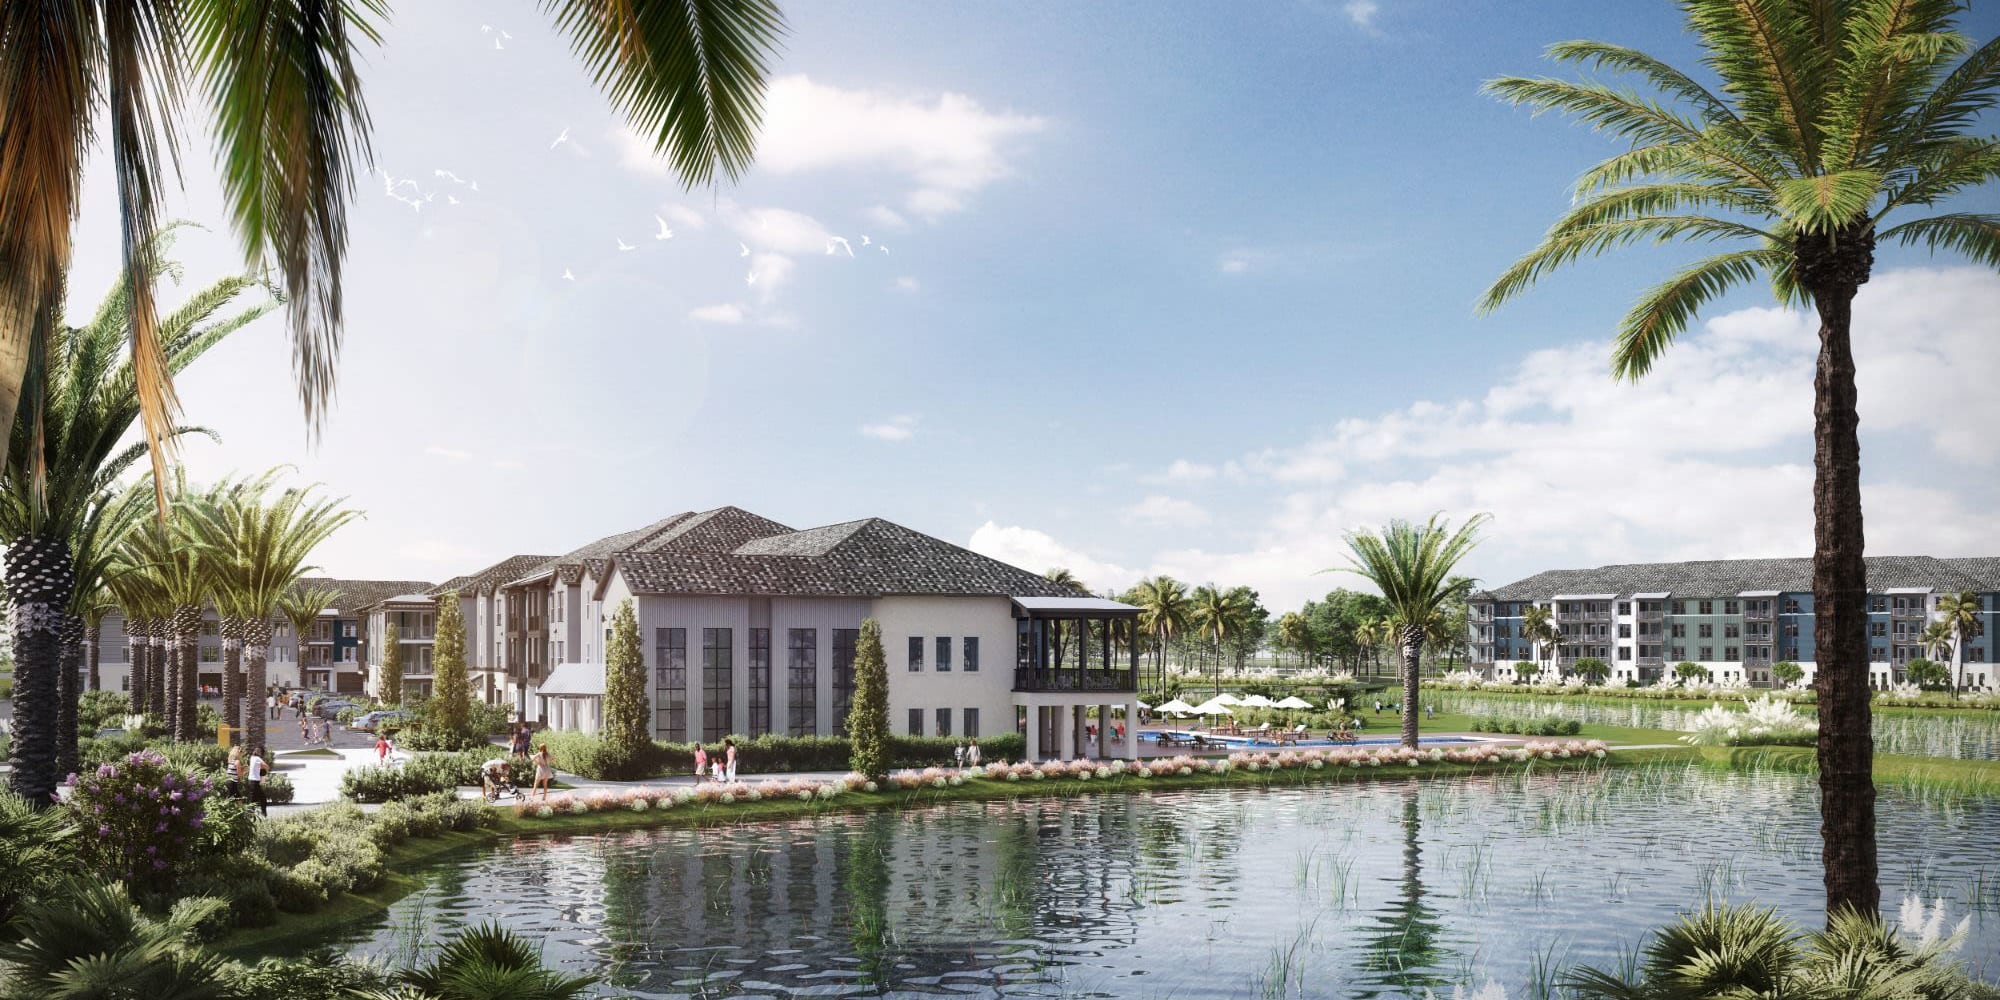 Beautiful rendering of the location at The Crossing at Palm Aire Apartment Homes in Sarasota, Florida